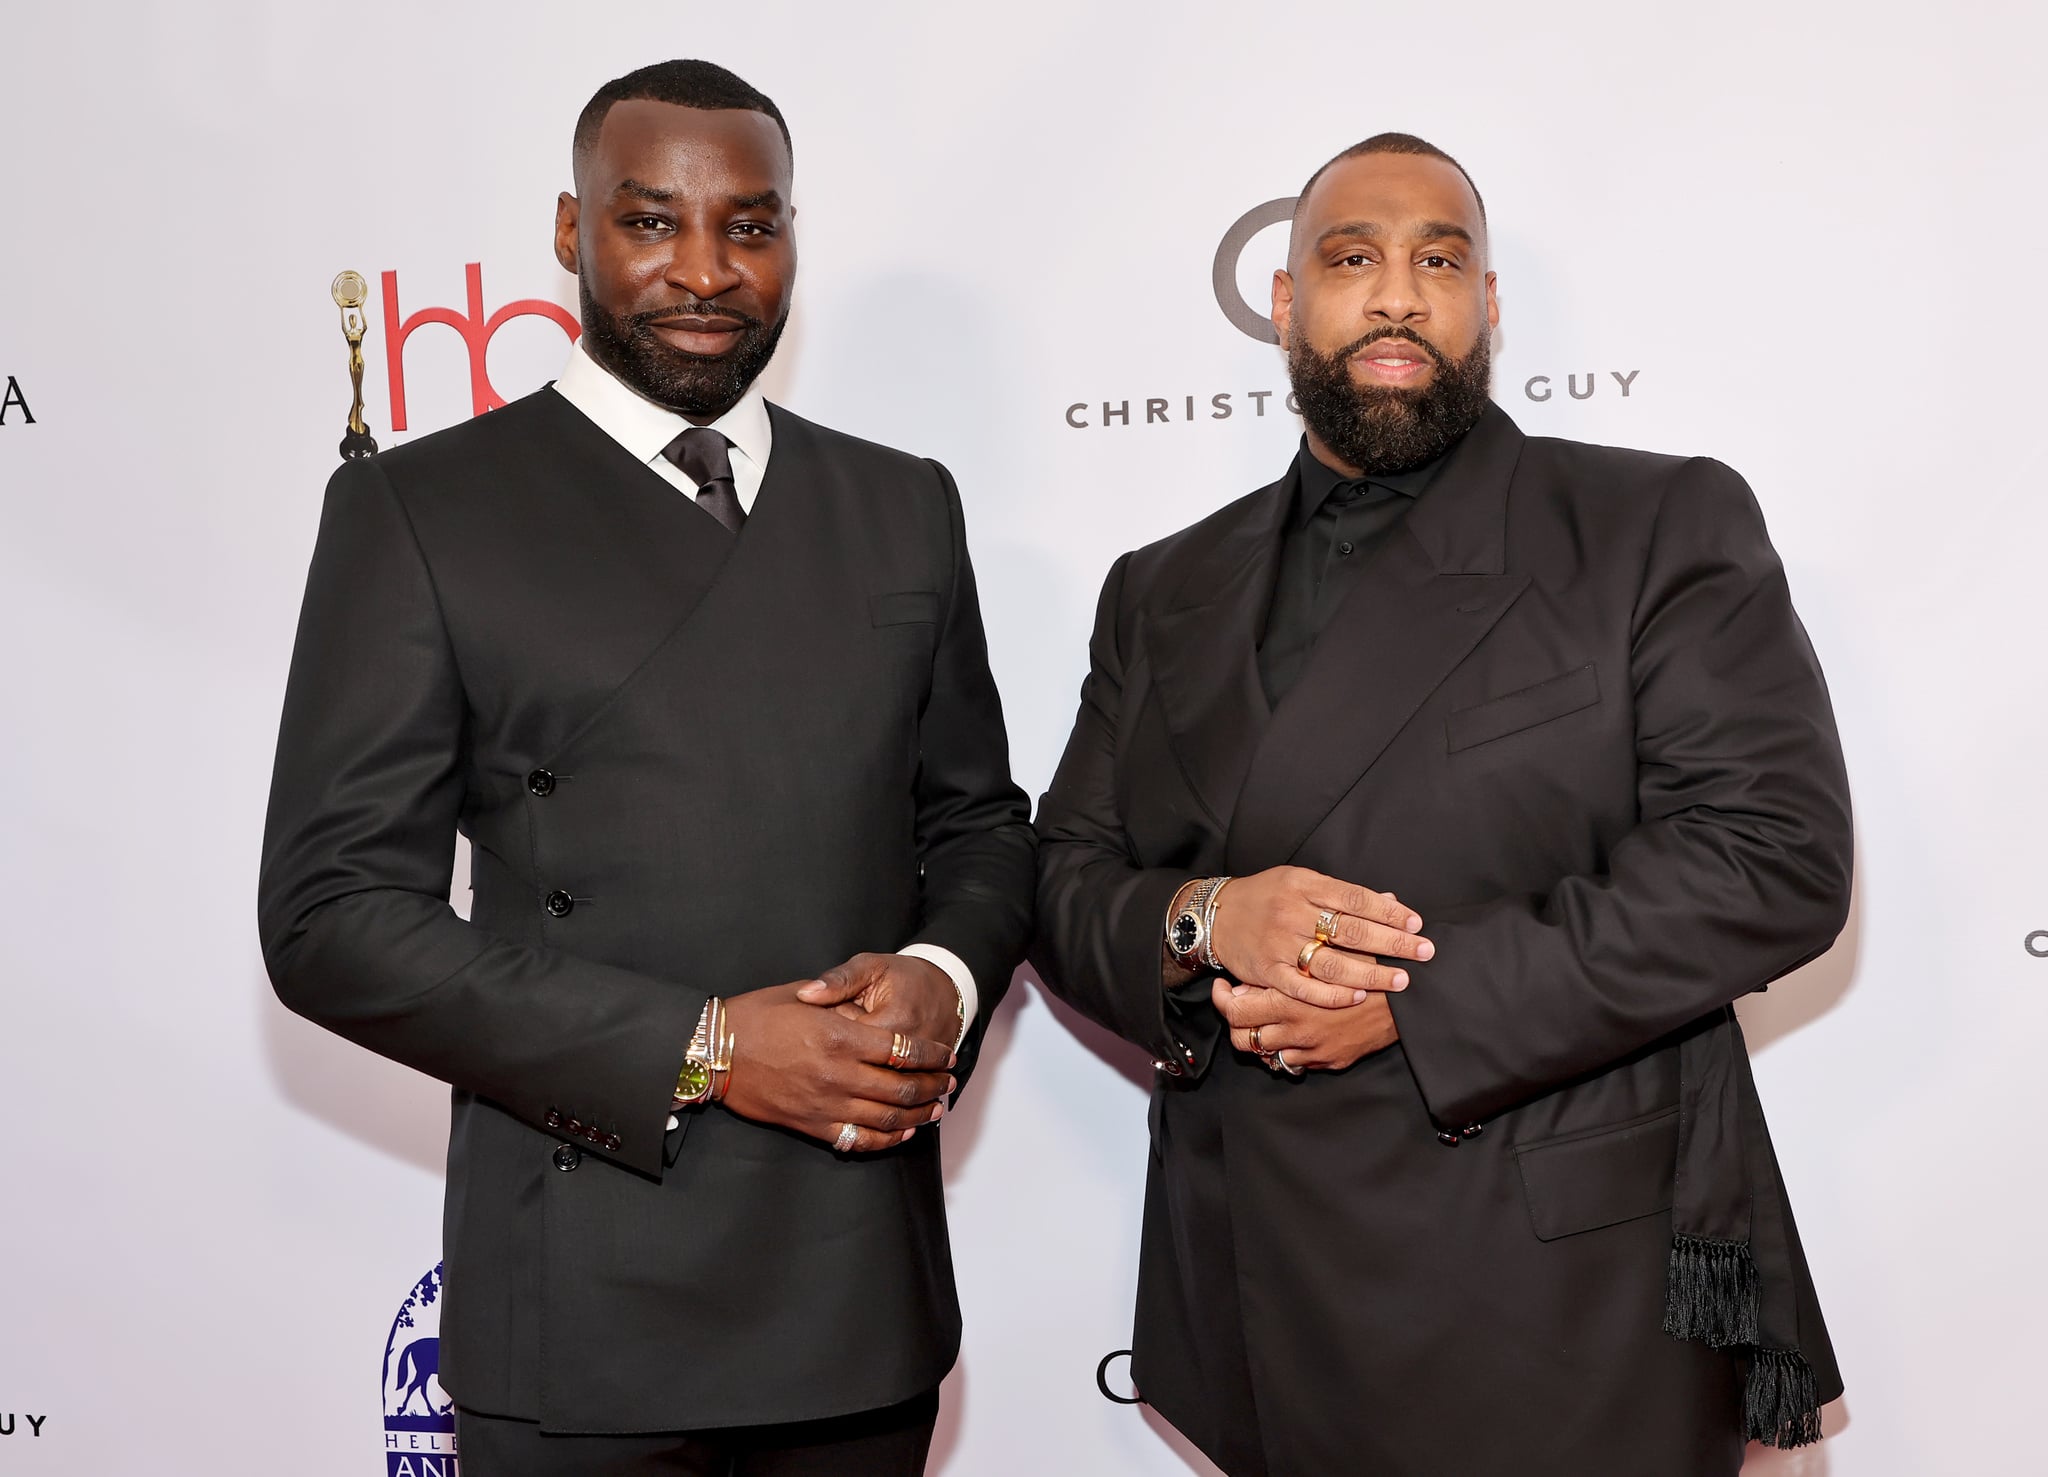 LOS ANGELES, CALIFORNIA - MARCH 19: (L-R) Wayman Bannerman and Micah McDonald attend the 7th Annual Hollywood Beauty Awards at Taglyan Complex on March 19, 2022 in Los Angeles, California. (Photo by Amy Sussman/Getty Images)